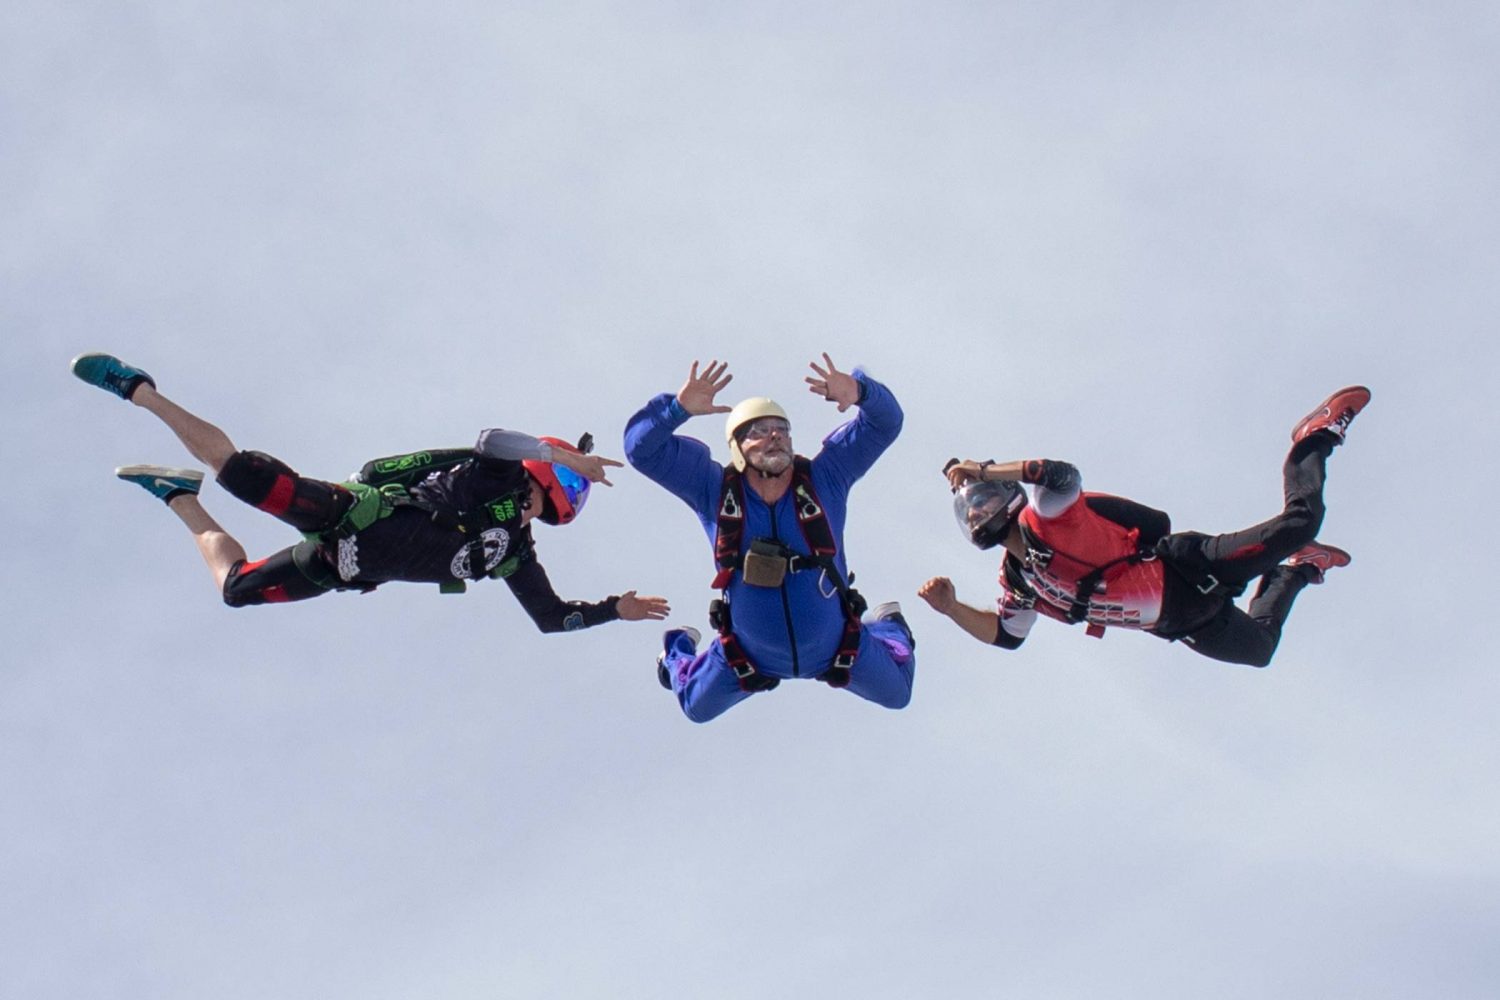 AFF Instructors and AFF Student in training during freefall at Florida's Best Skydiving School™